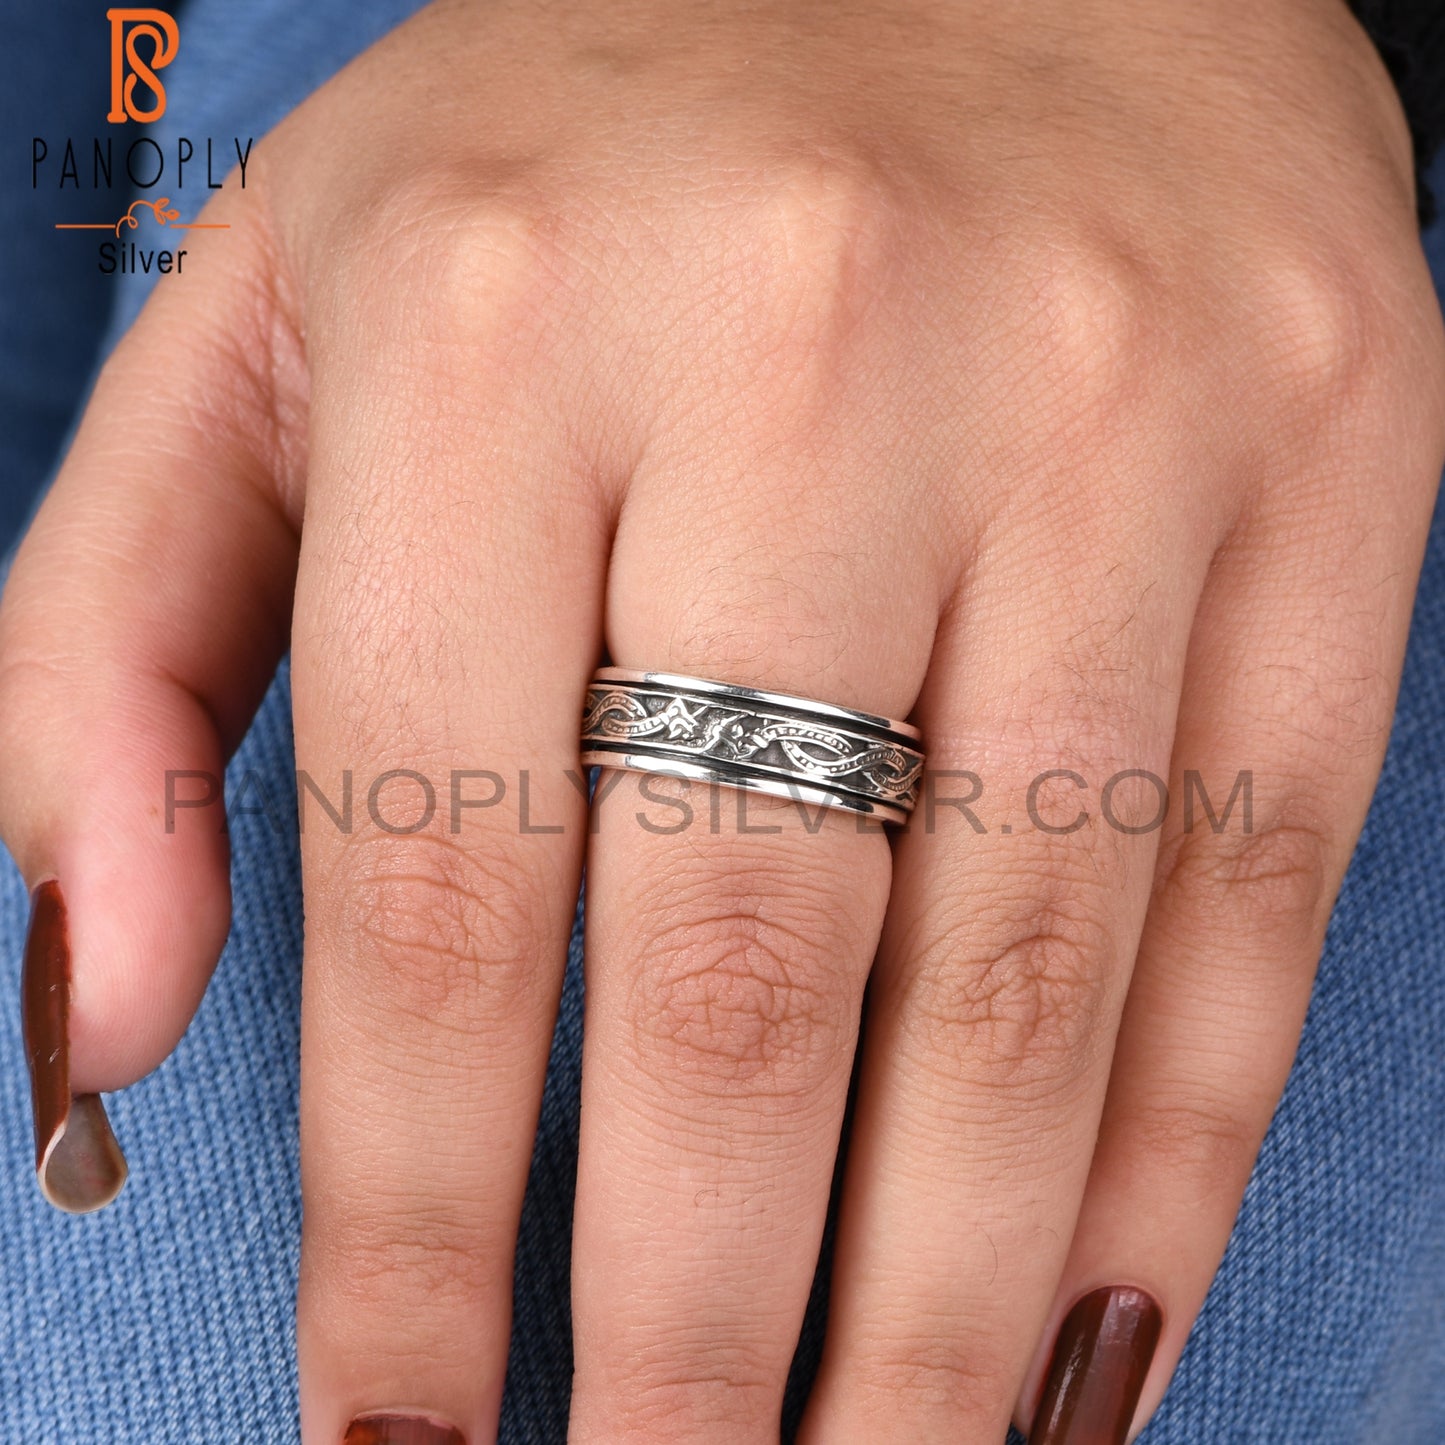 Spinner 925 Sterling Silver Thumb Ring